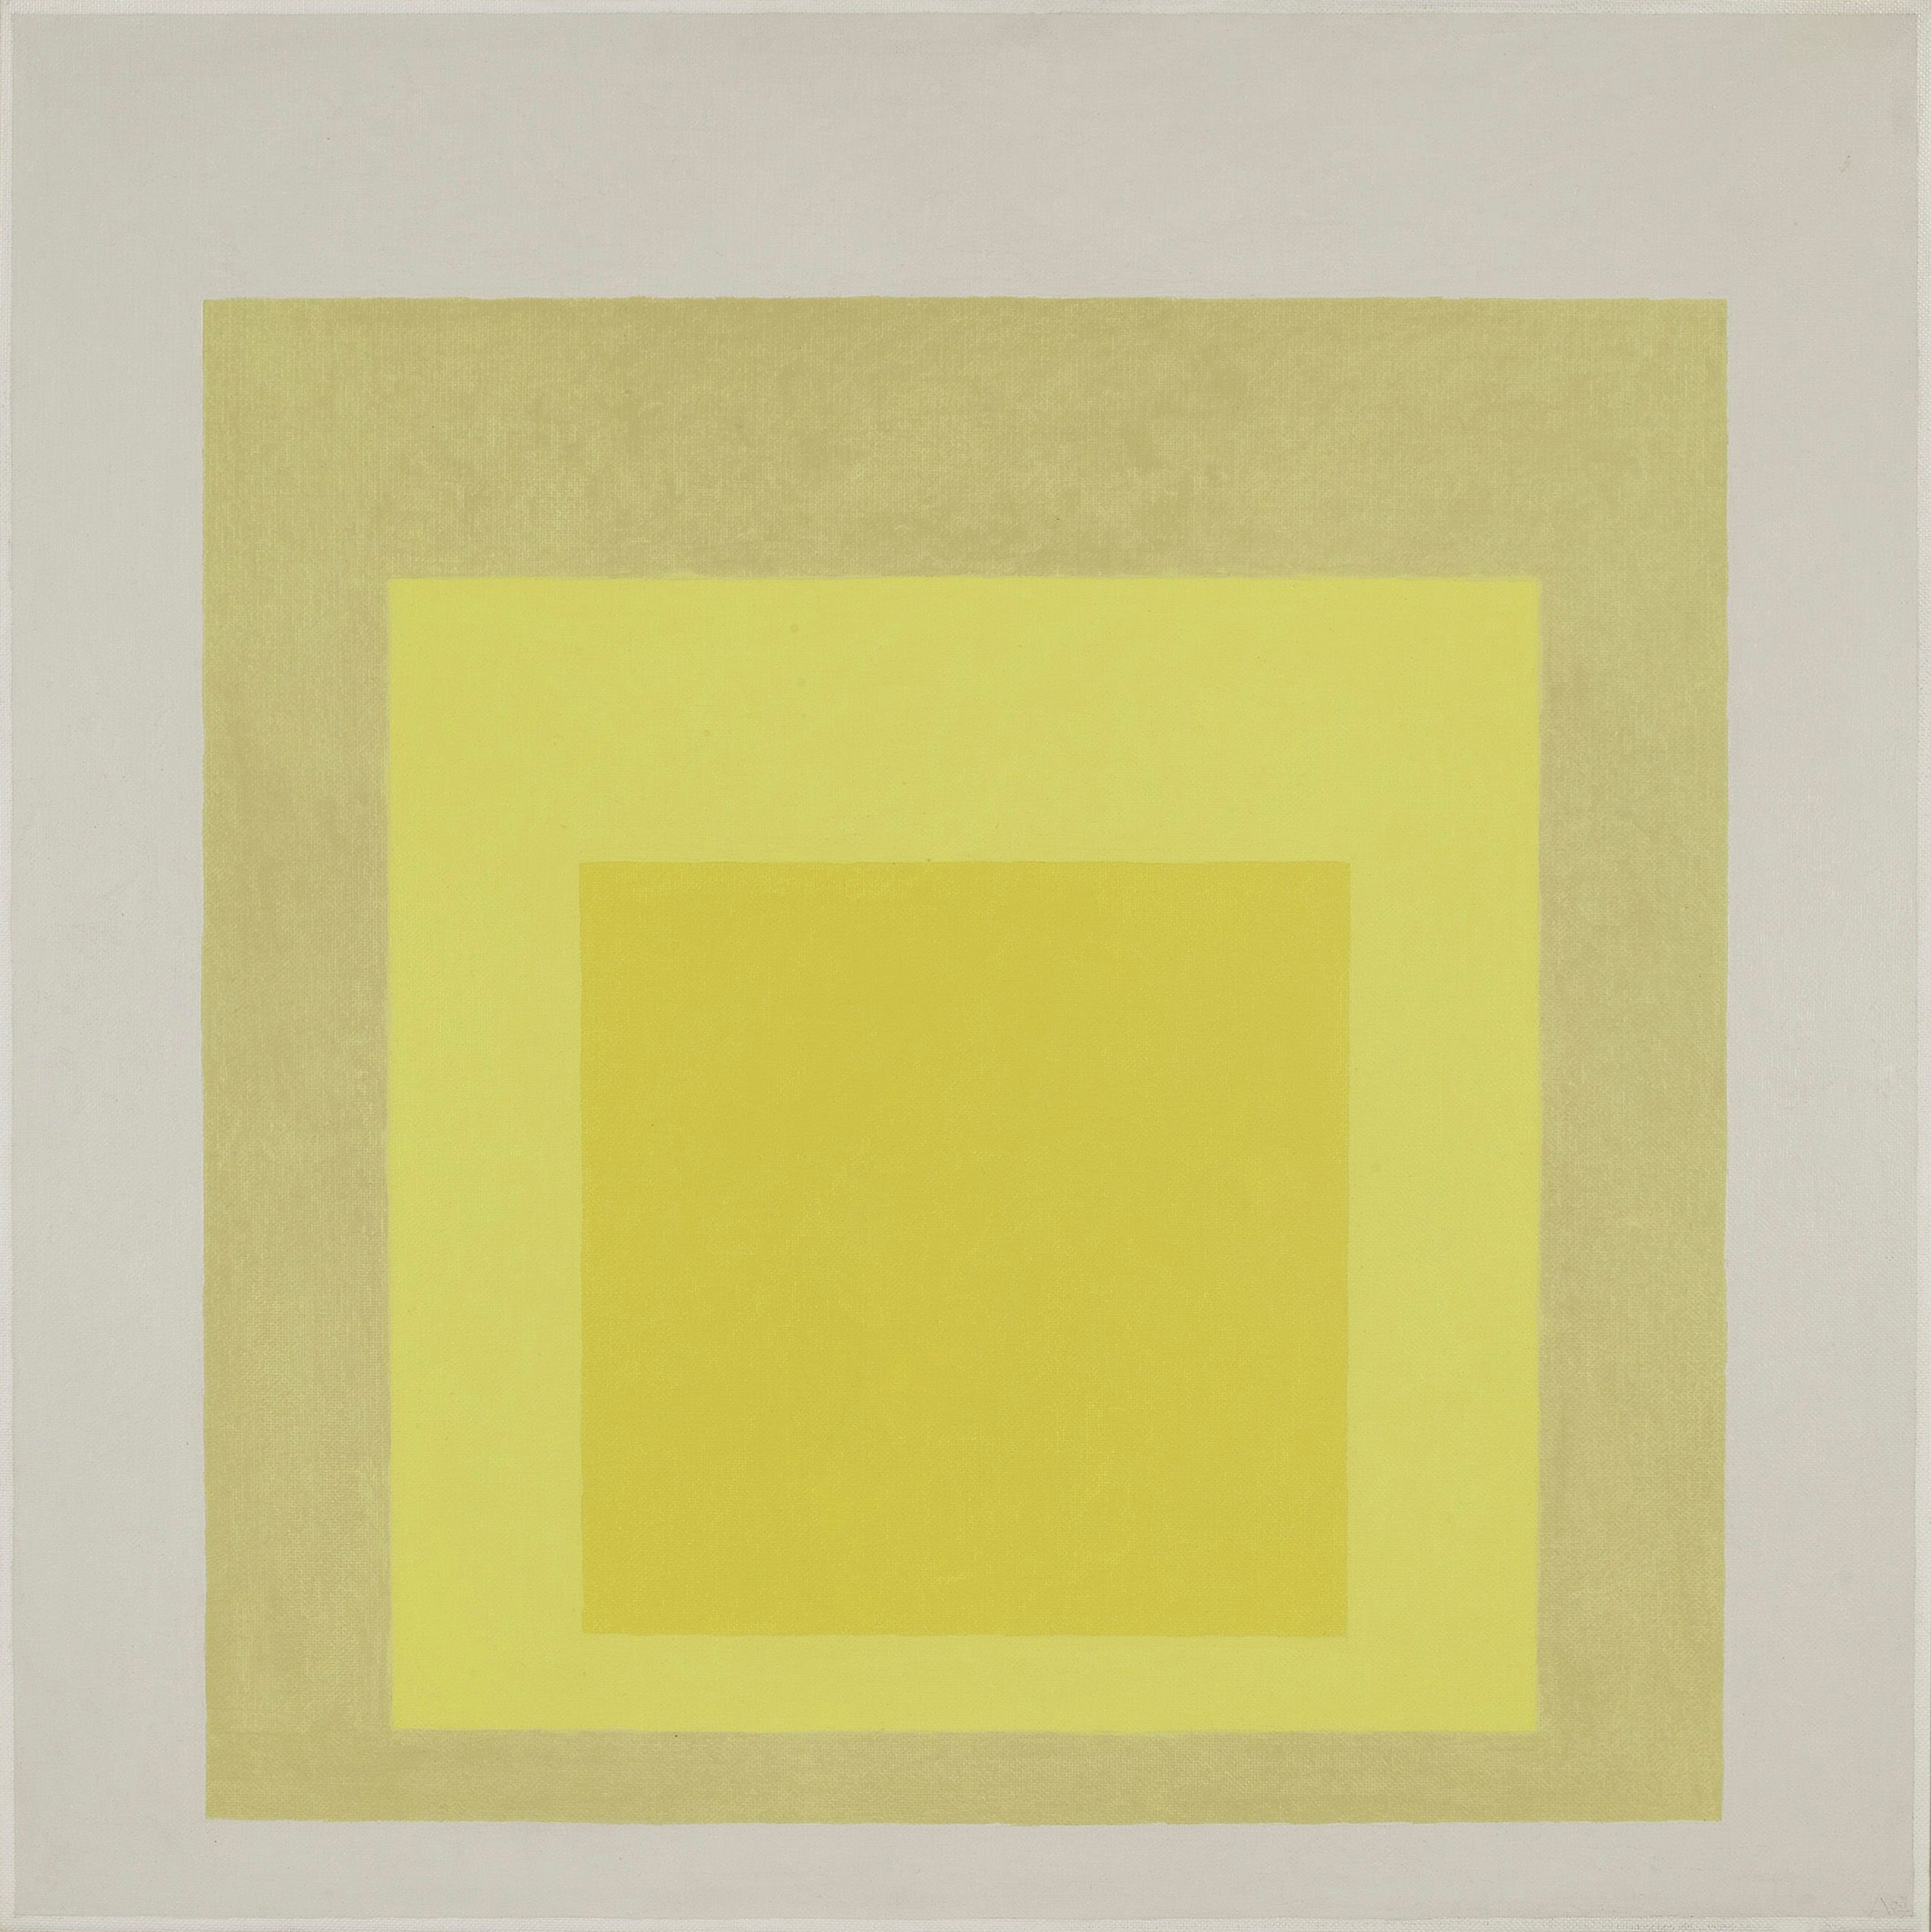 Josef Albers, Homage to the Square, Arrival, 1963